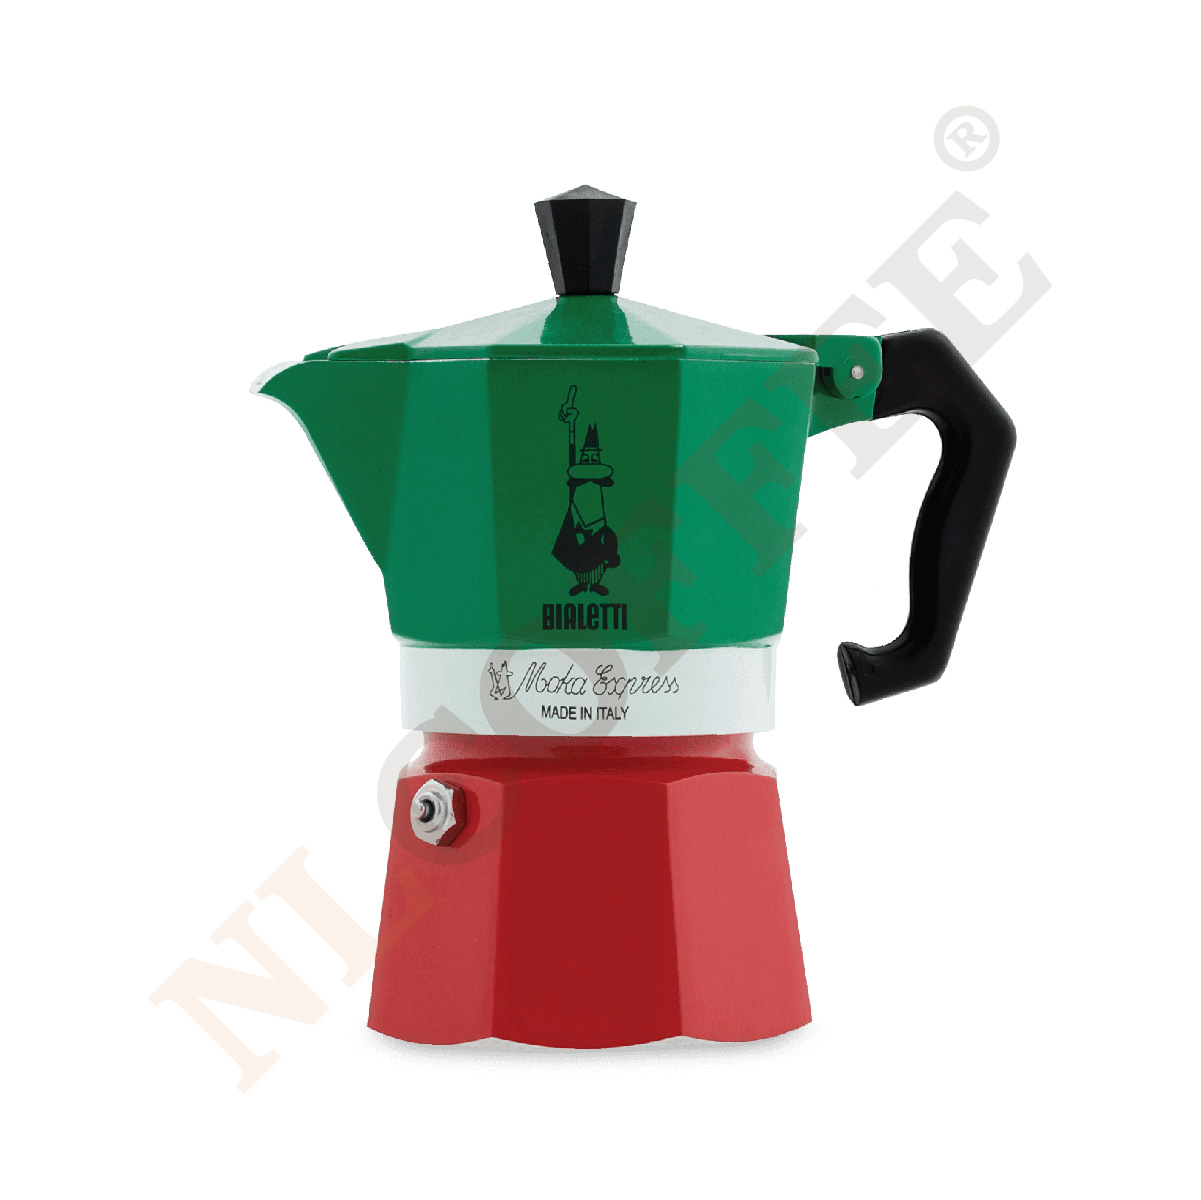 BIALETTI MOKA EXPRESS 3 CUP (SPECIAL COLOR)